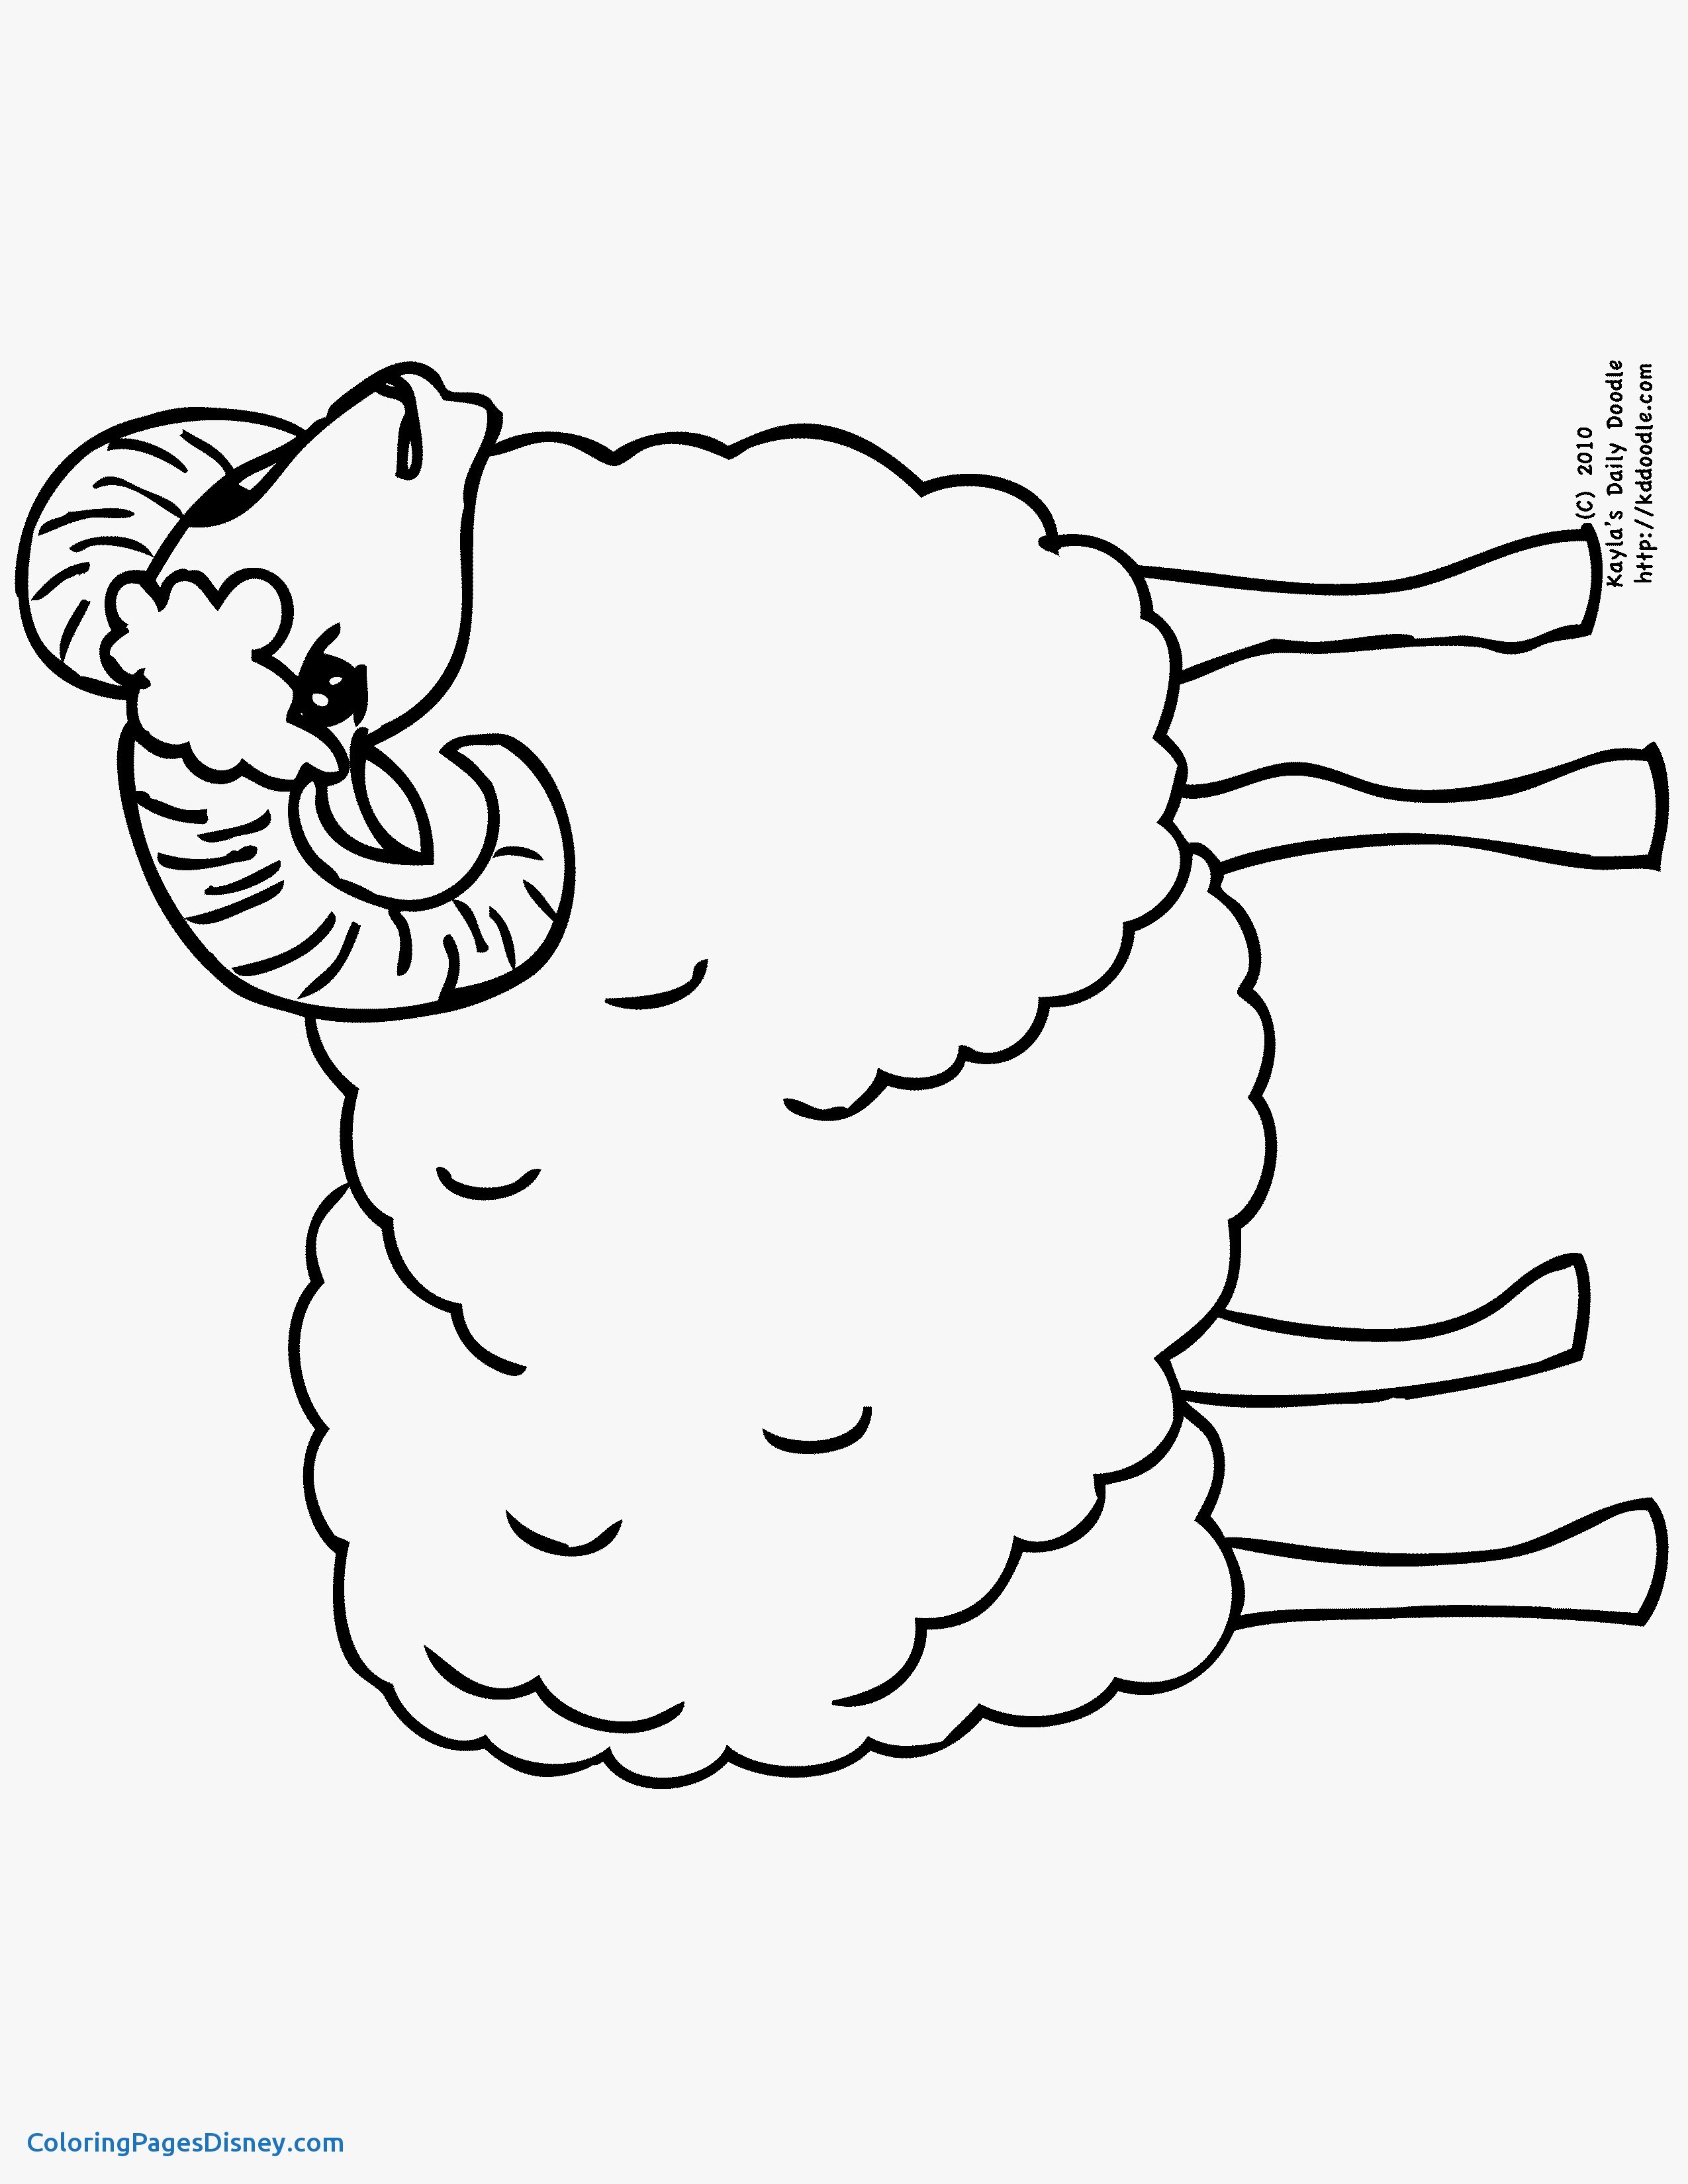 Ram Coloring Page at GetColorings.com | Free printable colorings pages